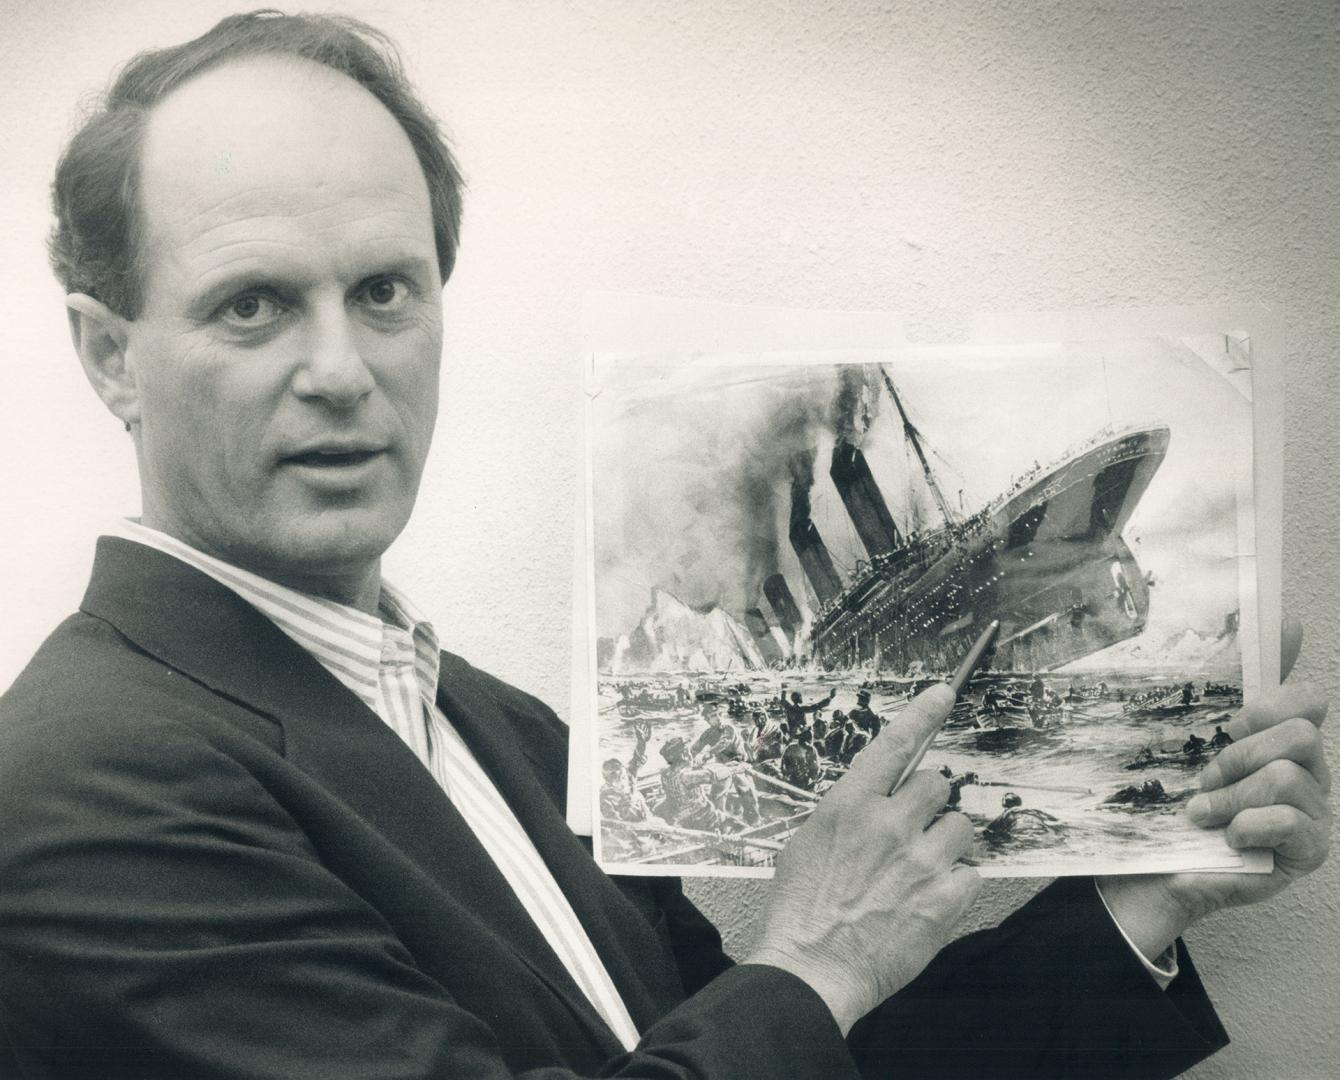 Wreck hunter: Robert Ballard, who found the Titanic's remains, will have 250,000 students watching when he examines Lake Ontario shipwrecks